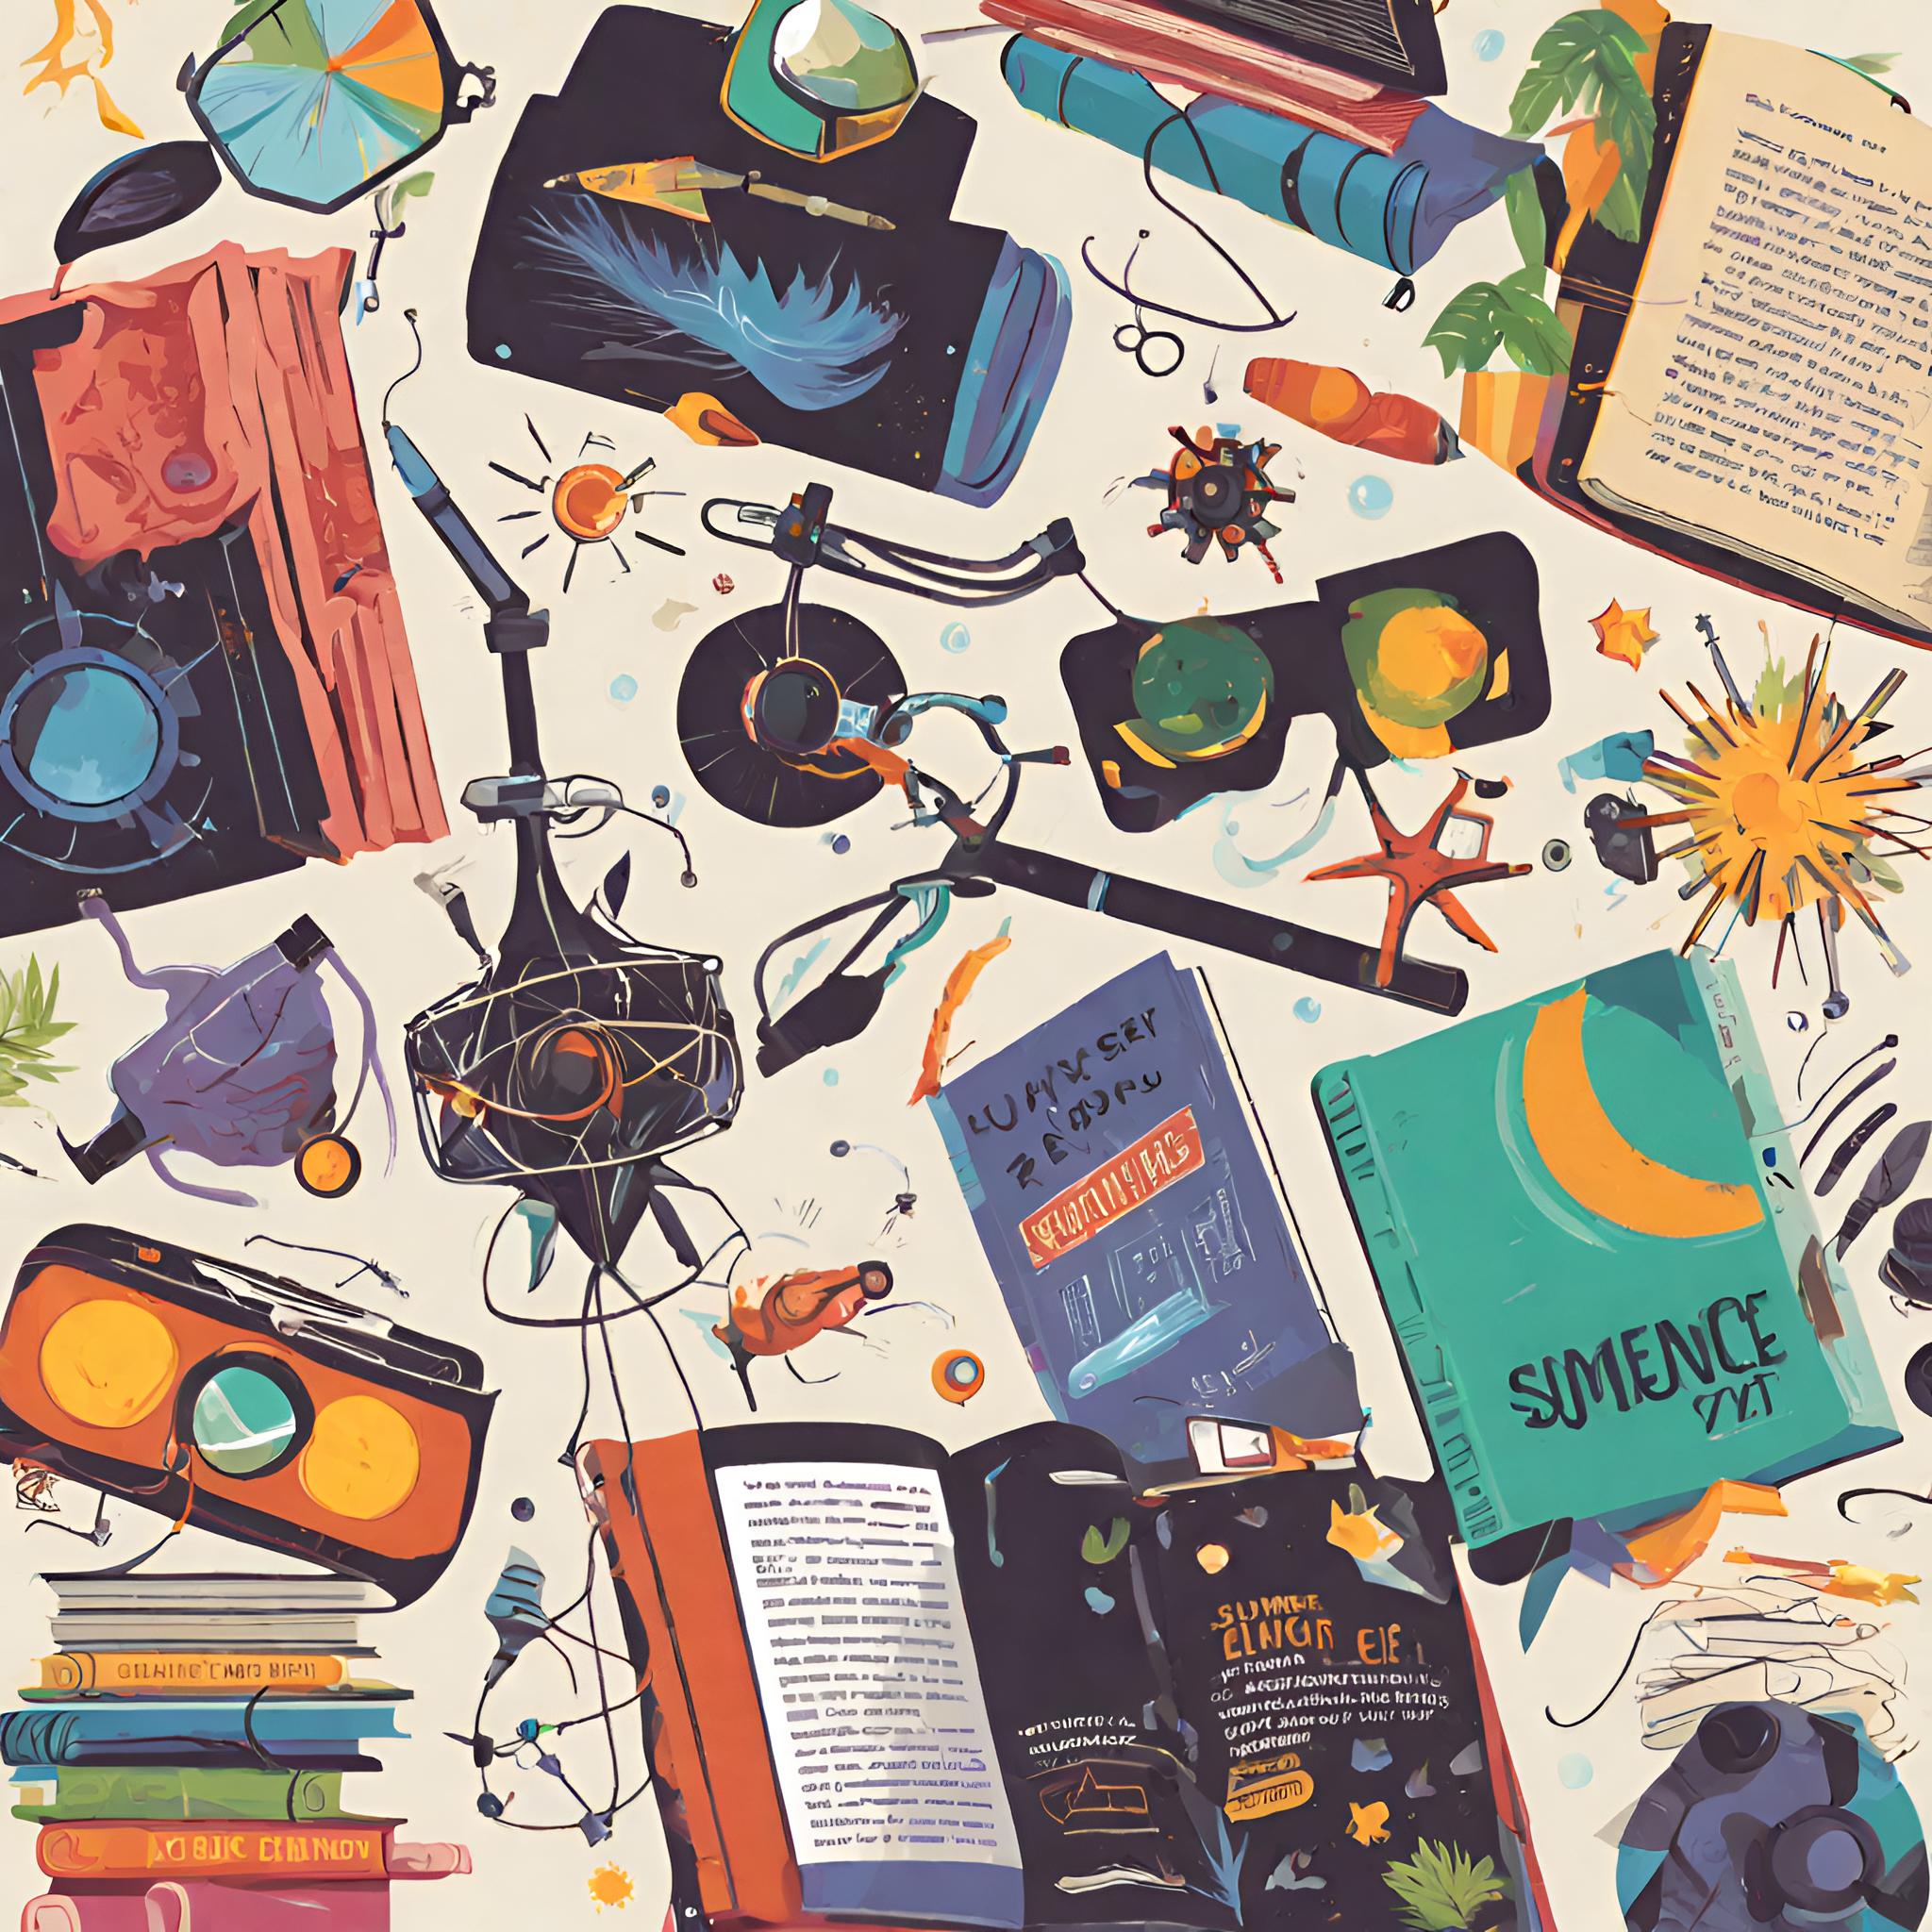 Image of books, stars and other stem items